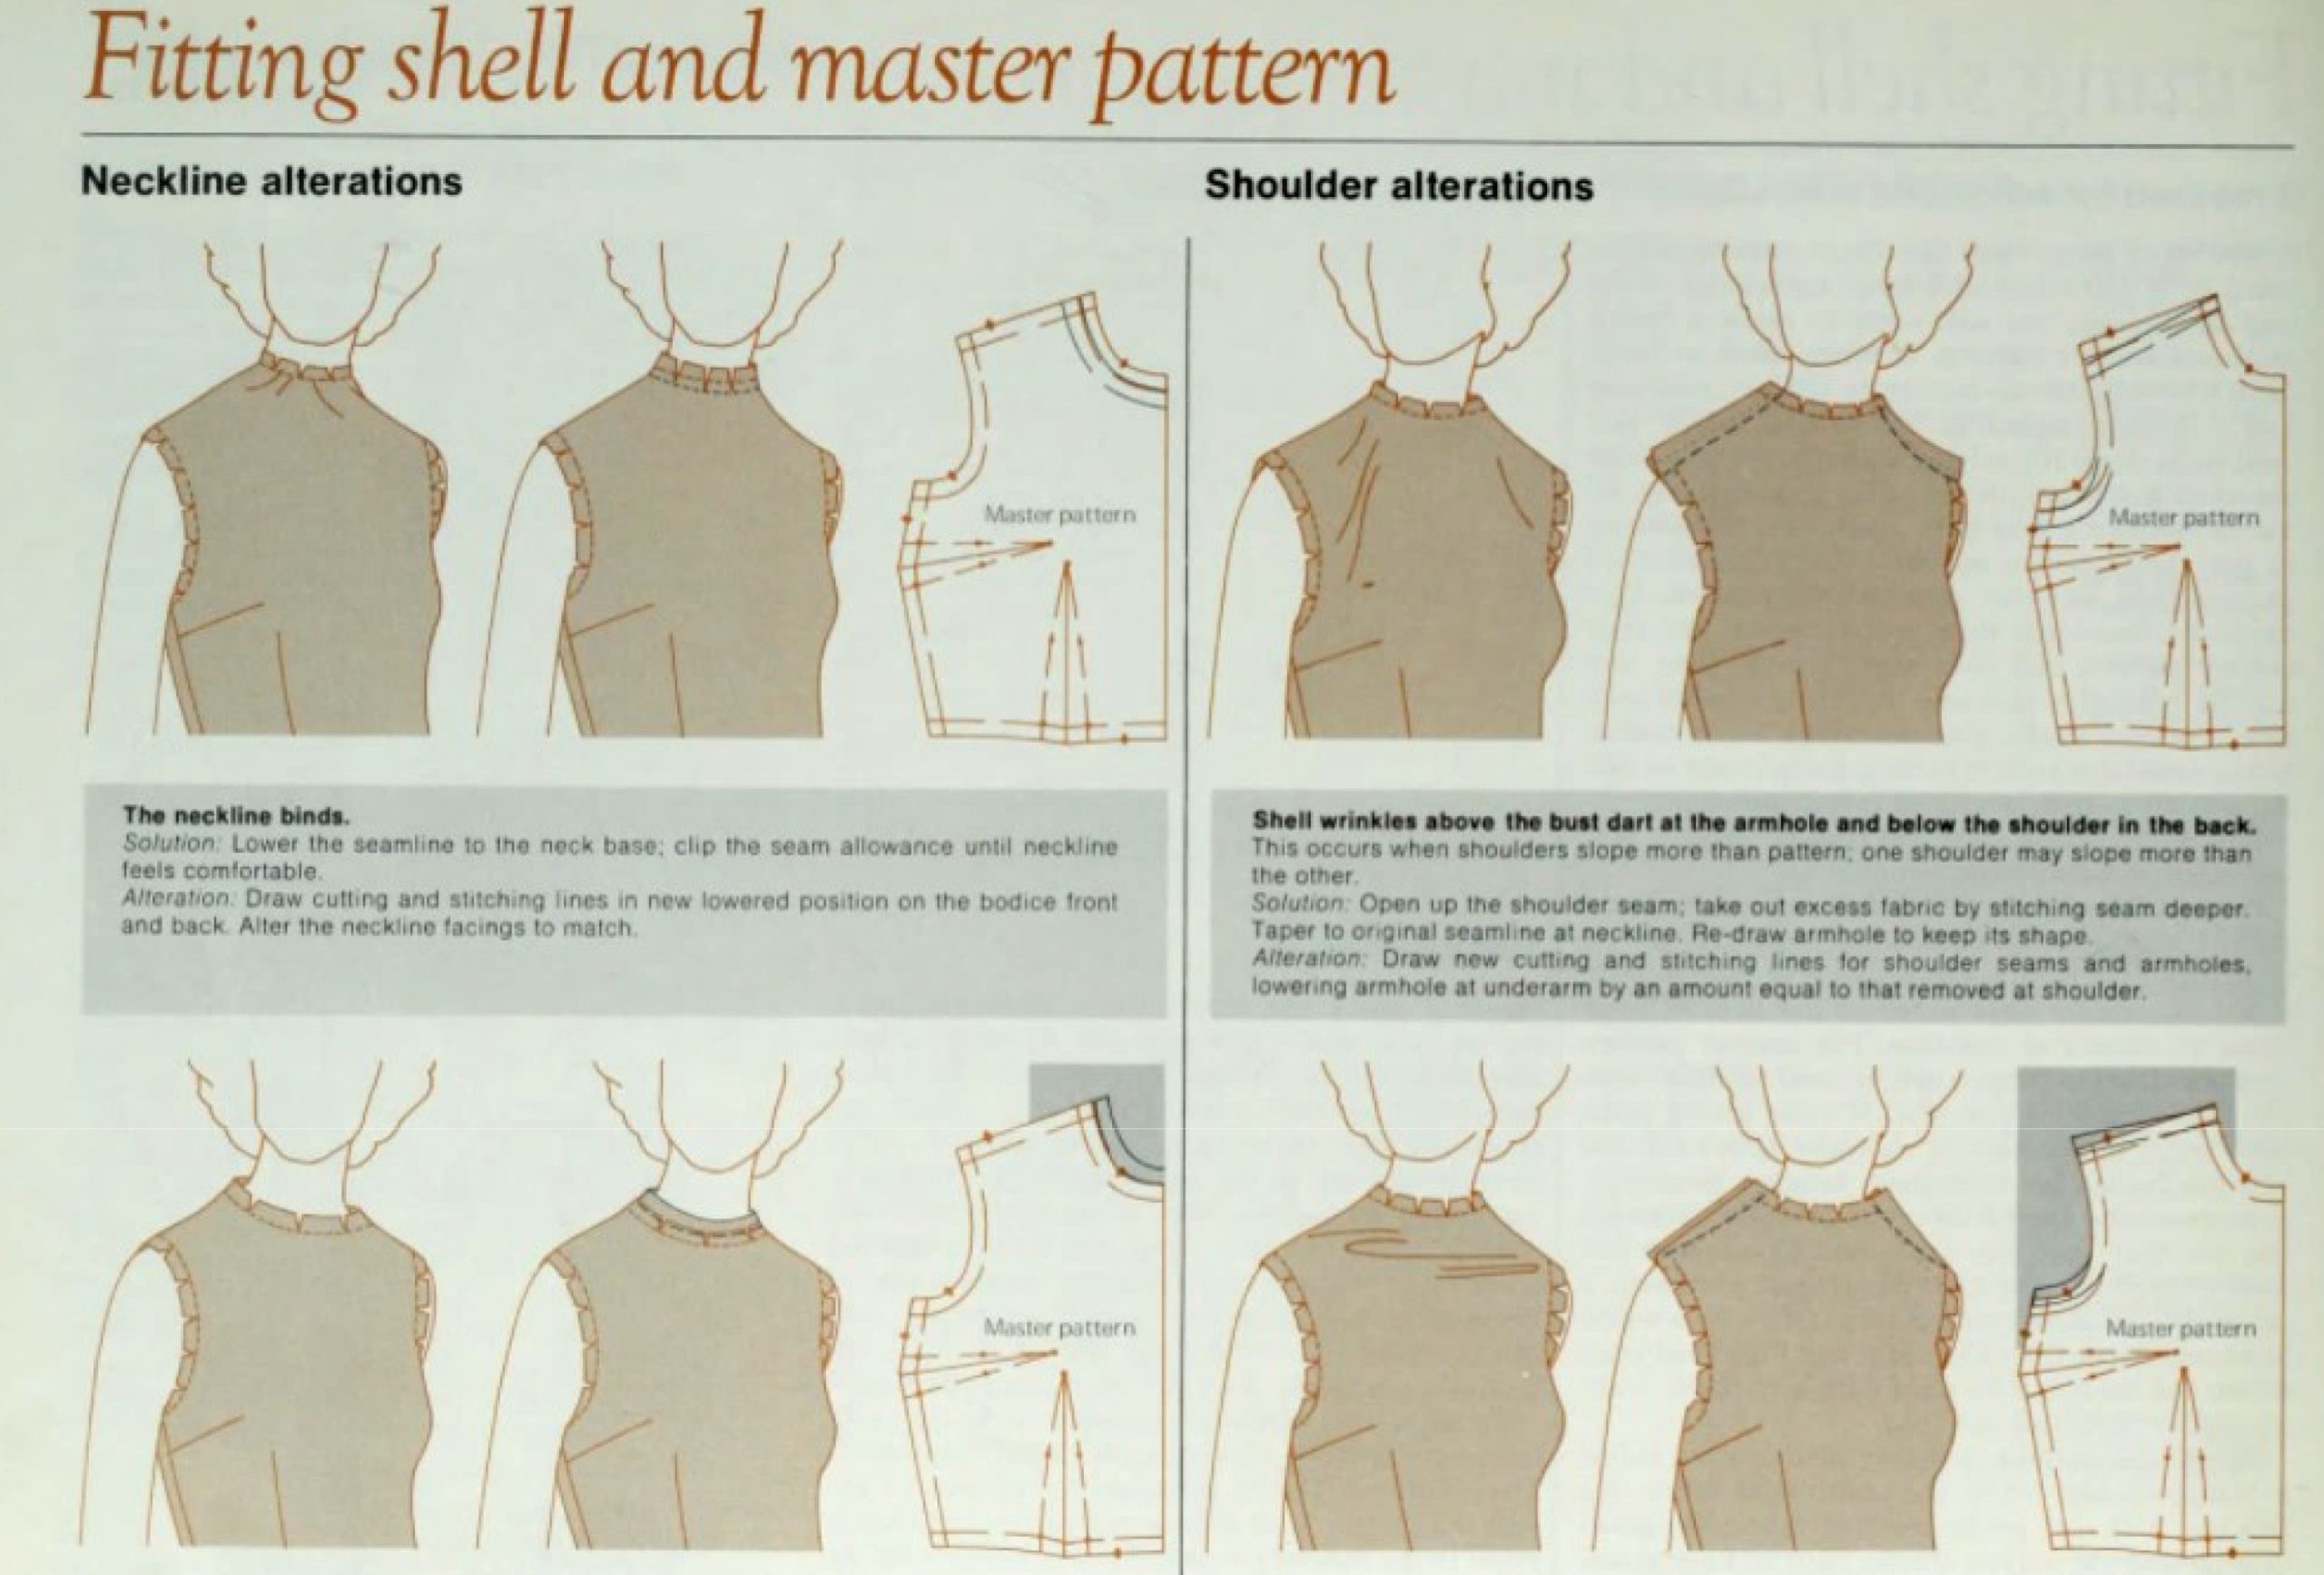 How to Sew PUL: The Ultimate Guide